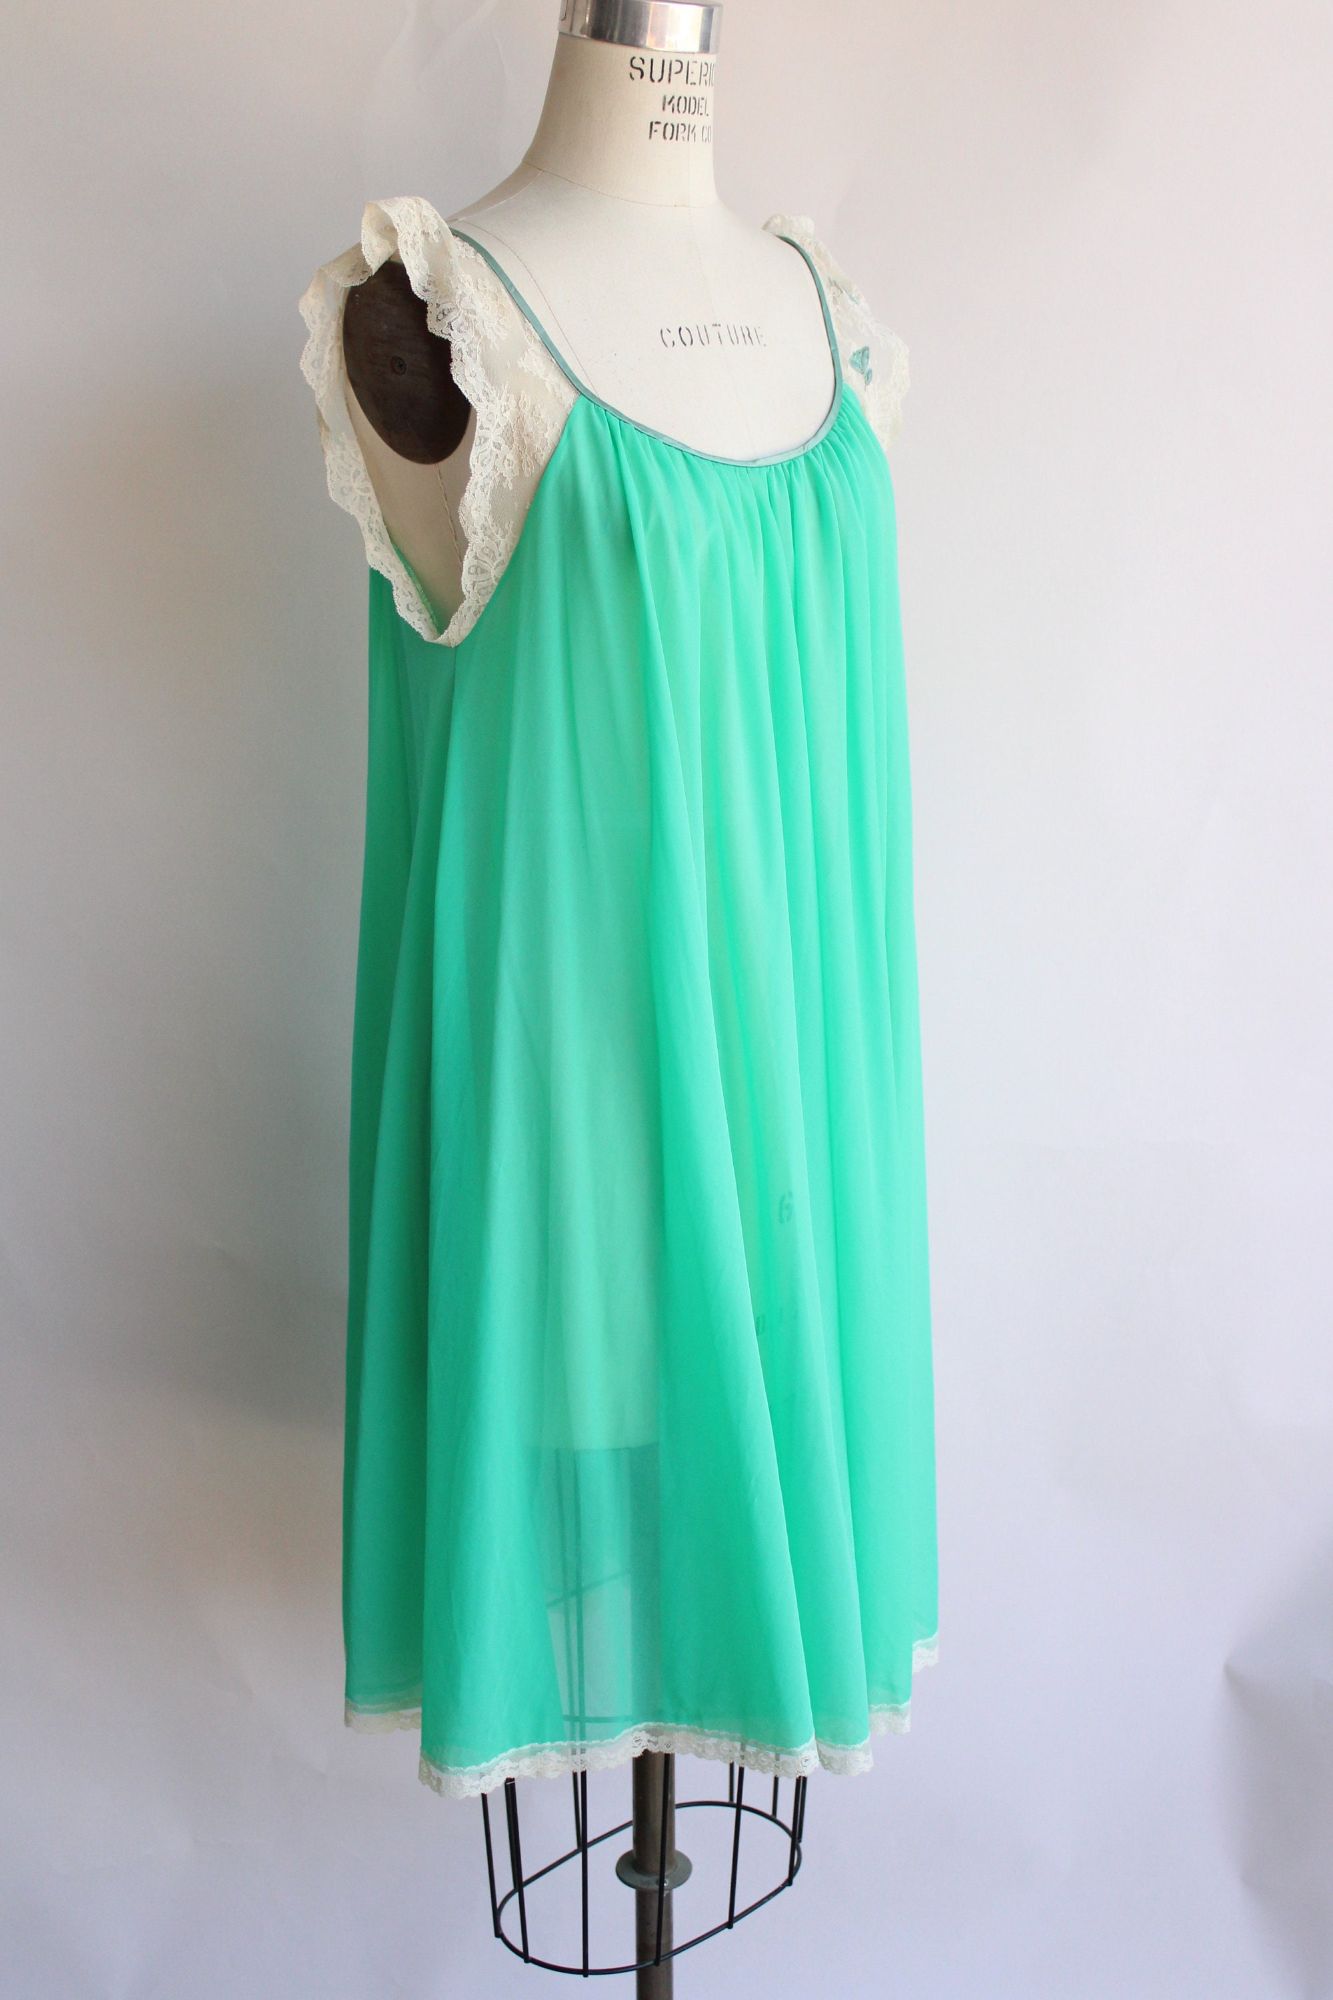 Vintage 1960s 1970s Green Nightgown with Butterflies, Claire Sandra by Lucie Ann